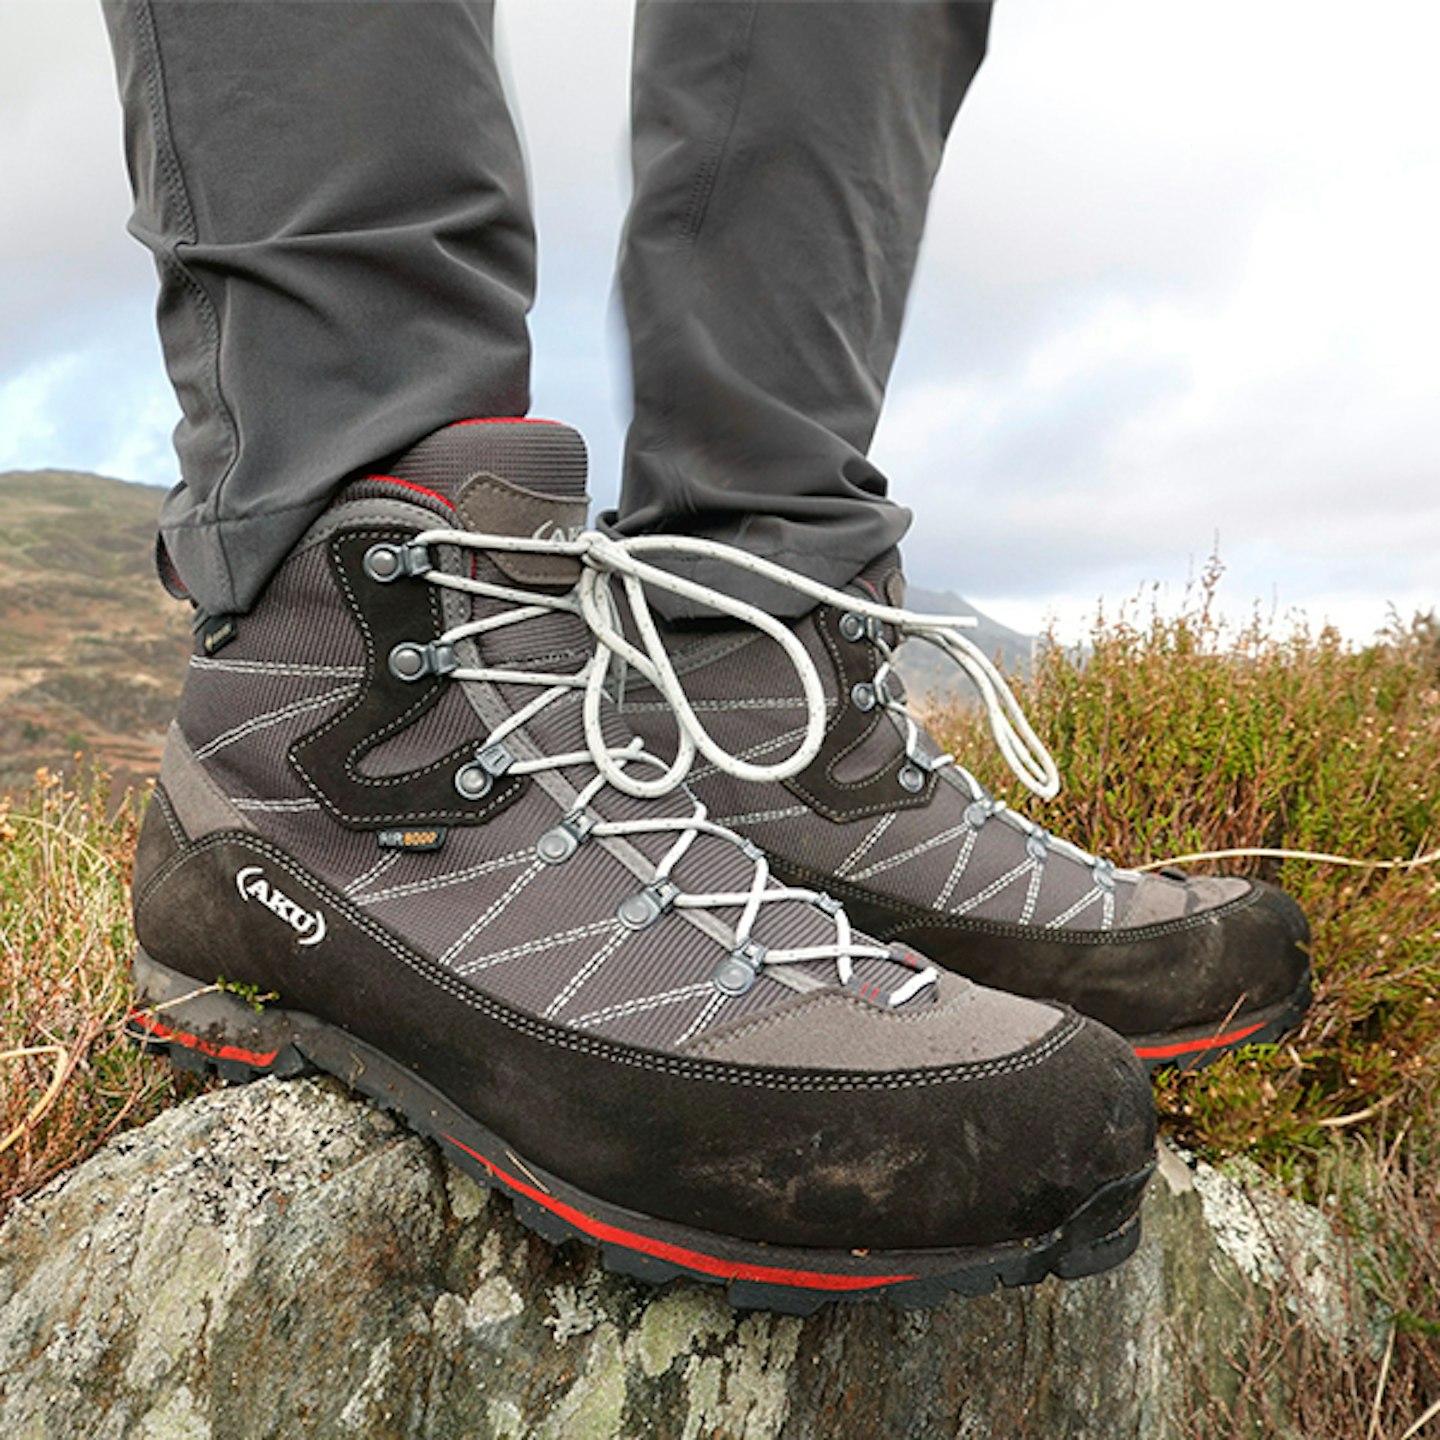 The Best 3 Season Walking Boots Reviewed | Hiking | live for the outdoors